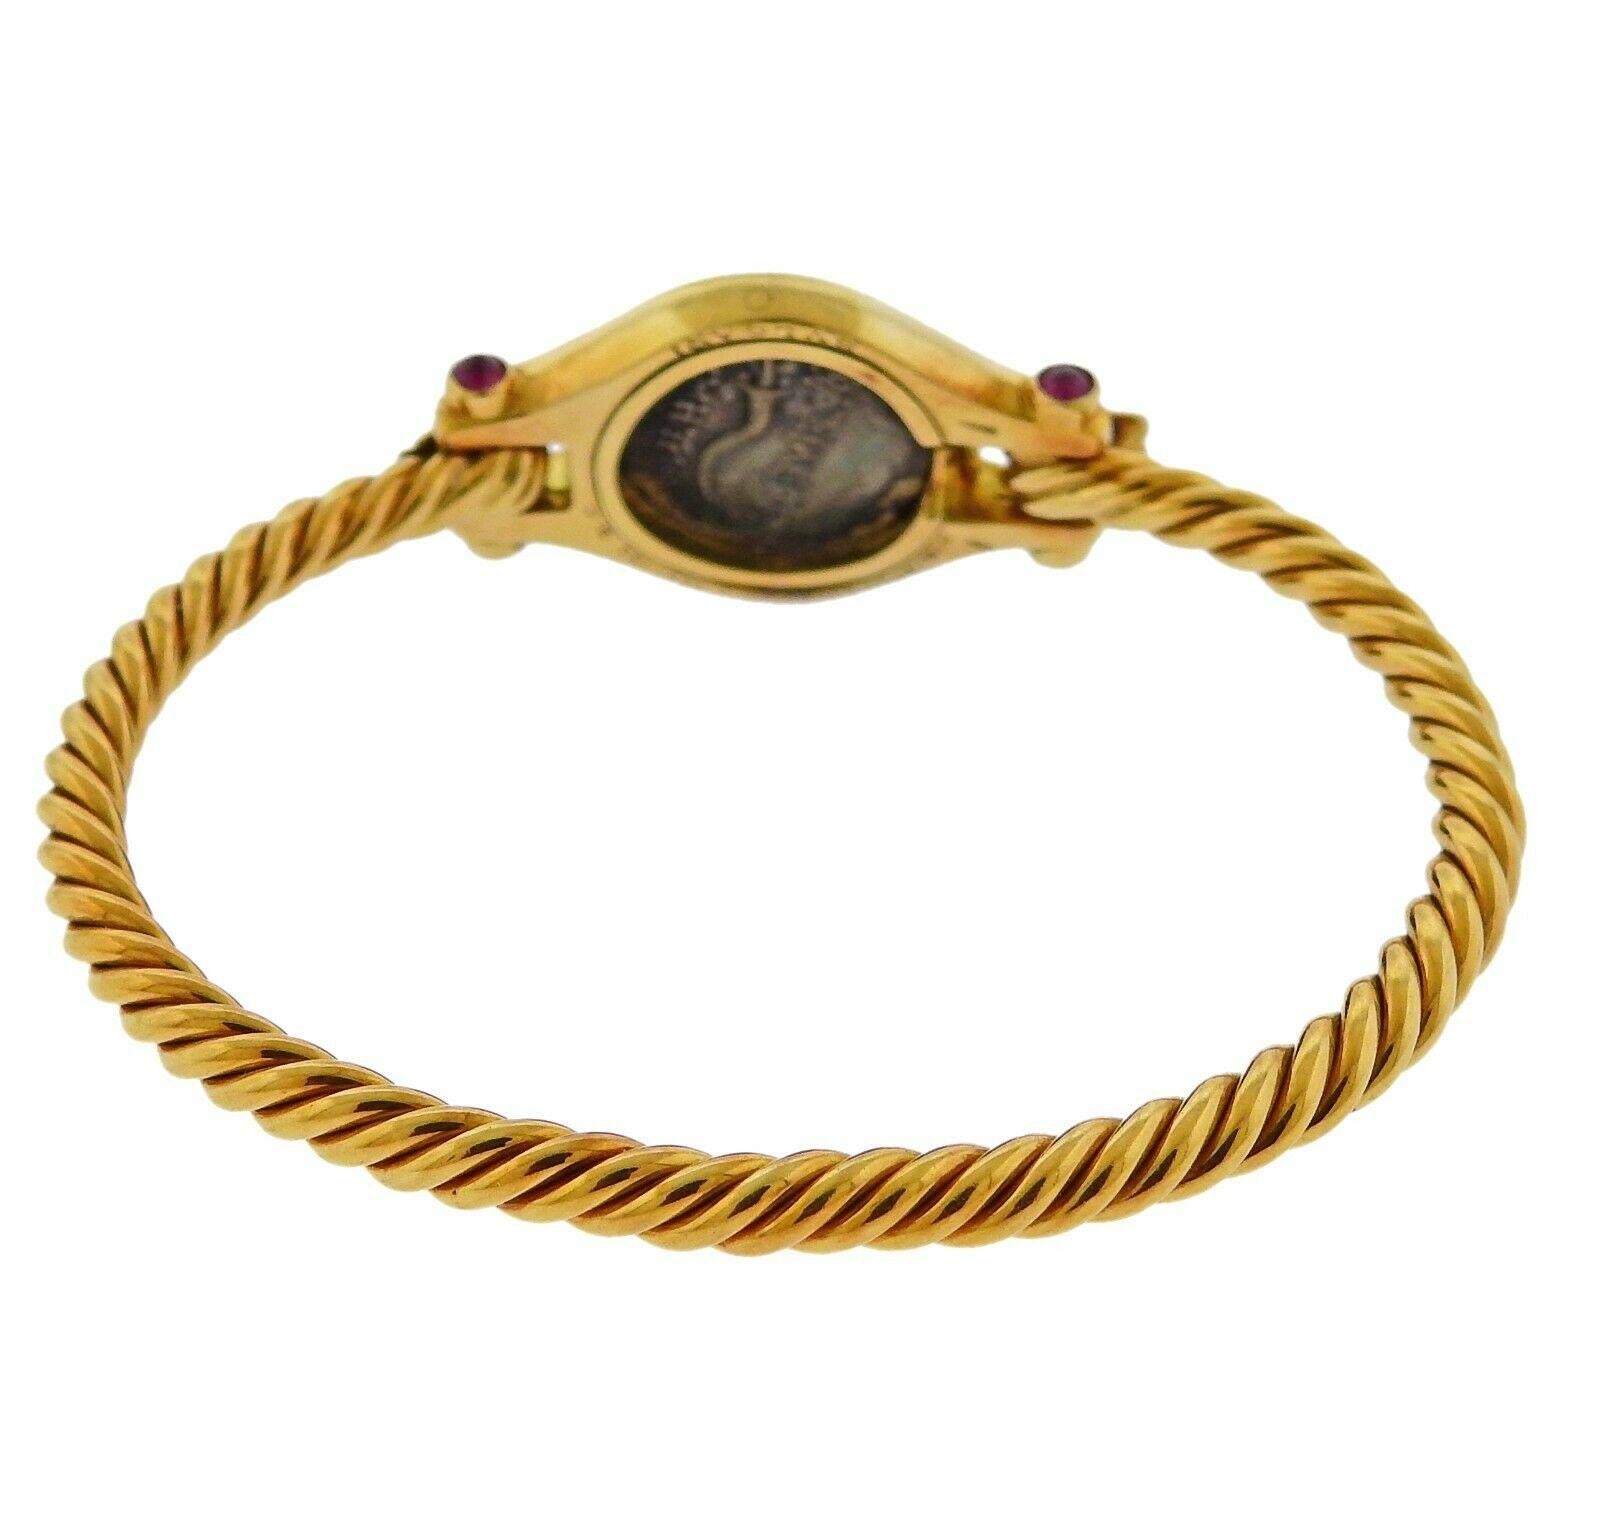 18k yellow gold bracelet by Bvlgari, set with an ancient coin, surrounded by ruby cabochons. Bracelet will fit approx. 7